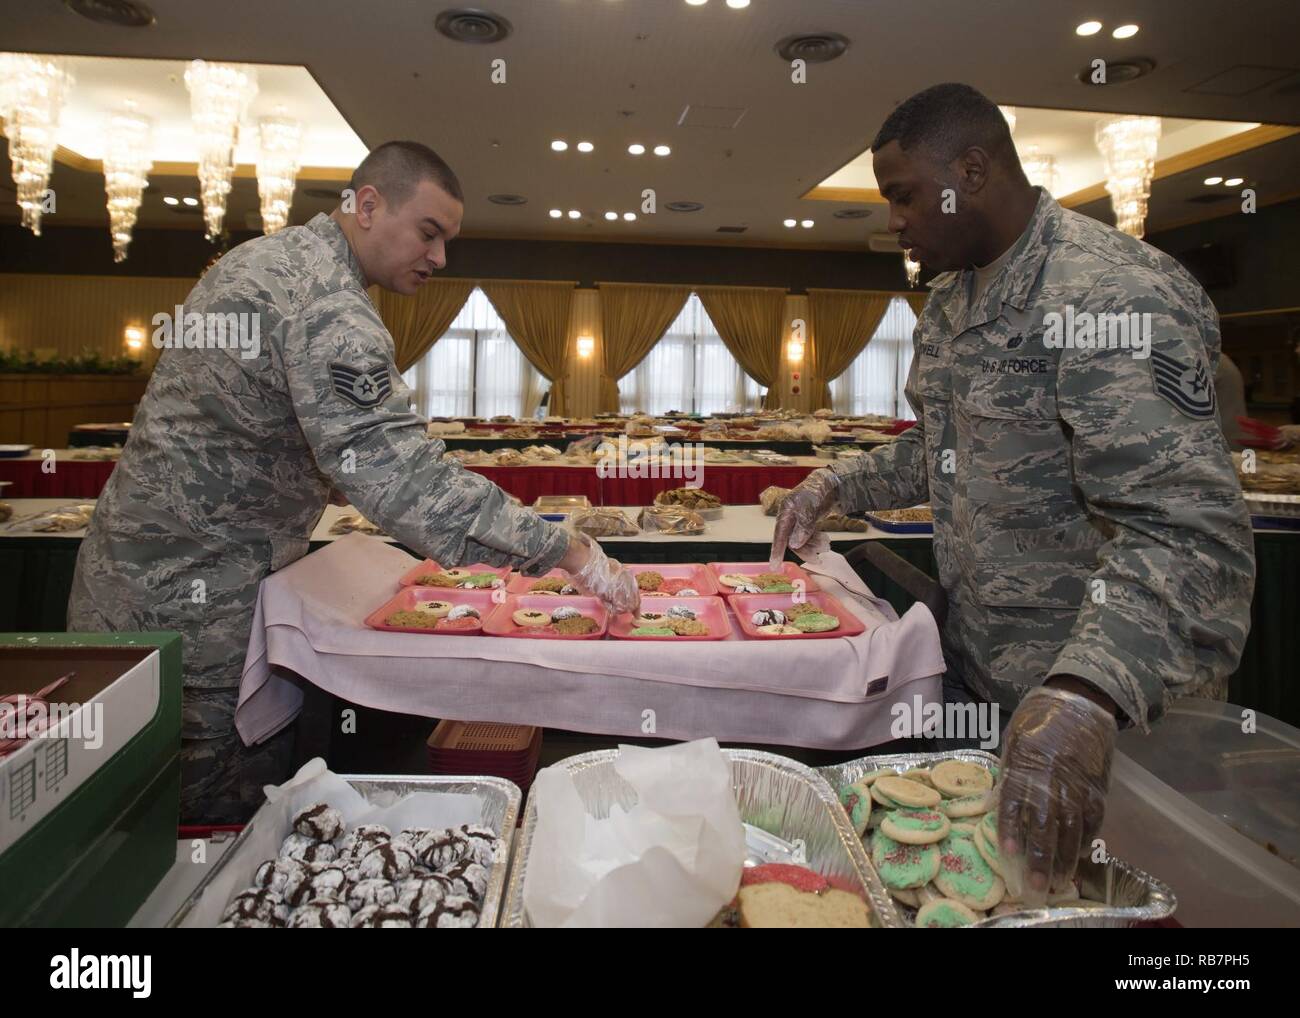 U.S. Air Force Staff Sgt. Robert Smalling, left, the 35th Medial Operations Squadron immunizations NCO in charge, and Tech. Sgt. Johnnie Powell, right, the 35th Force Support Squadron readiness and mortuary affairs NCO in charge, divide cookies during the annual Cookie Caper event at Misawa Air Base, Japan, Dec. 7, 2016. Volunteers gave more than 14,400 home-baked cookies to the event, while others donated dough to be cooked. Stock Photo